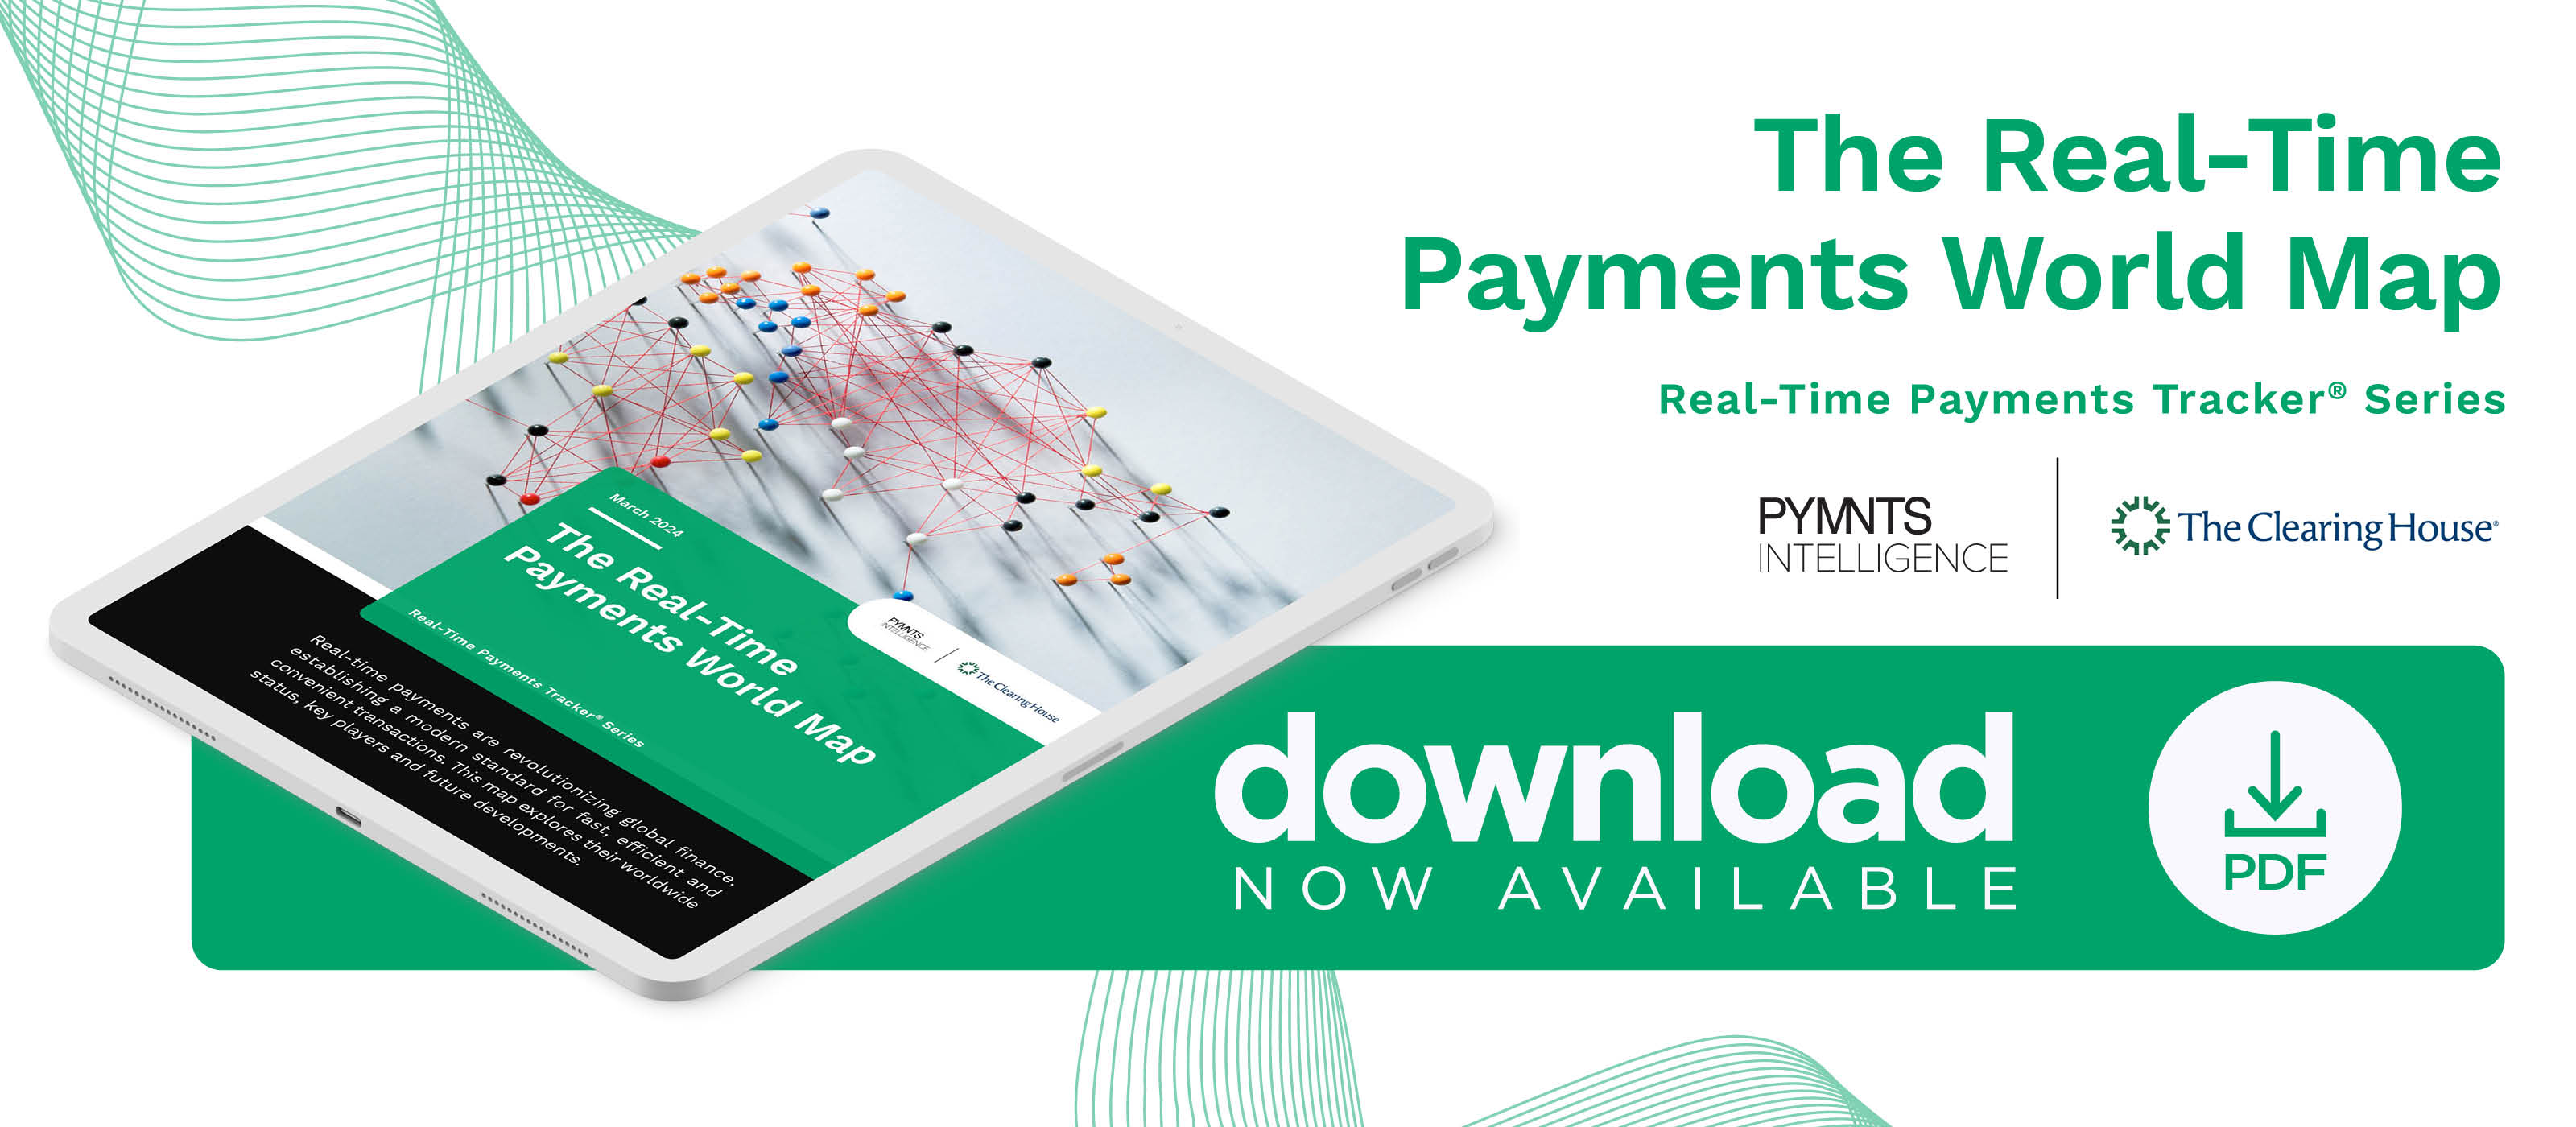 The Real-TIme Payments World Map explore the growth and innovation of faster consumers payments around the world.